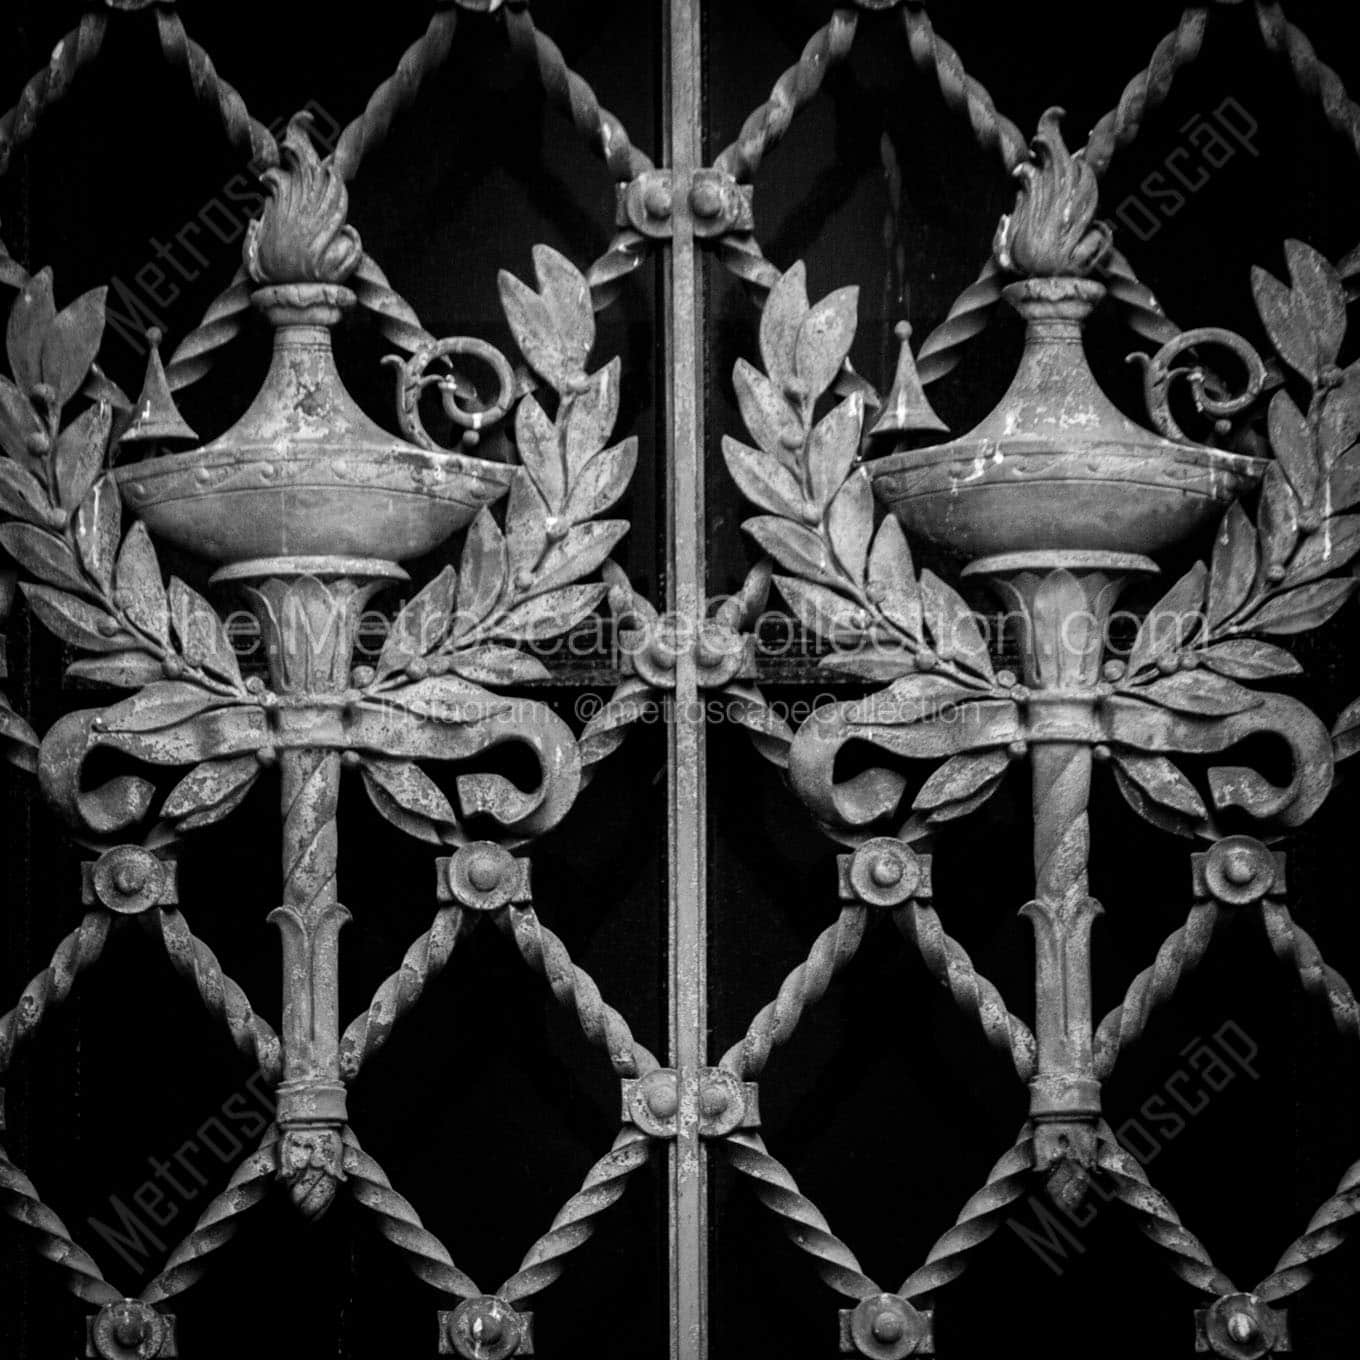 gated windows cleveland public library building Black & White Office Art